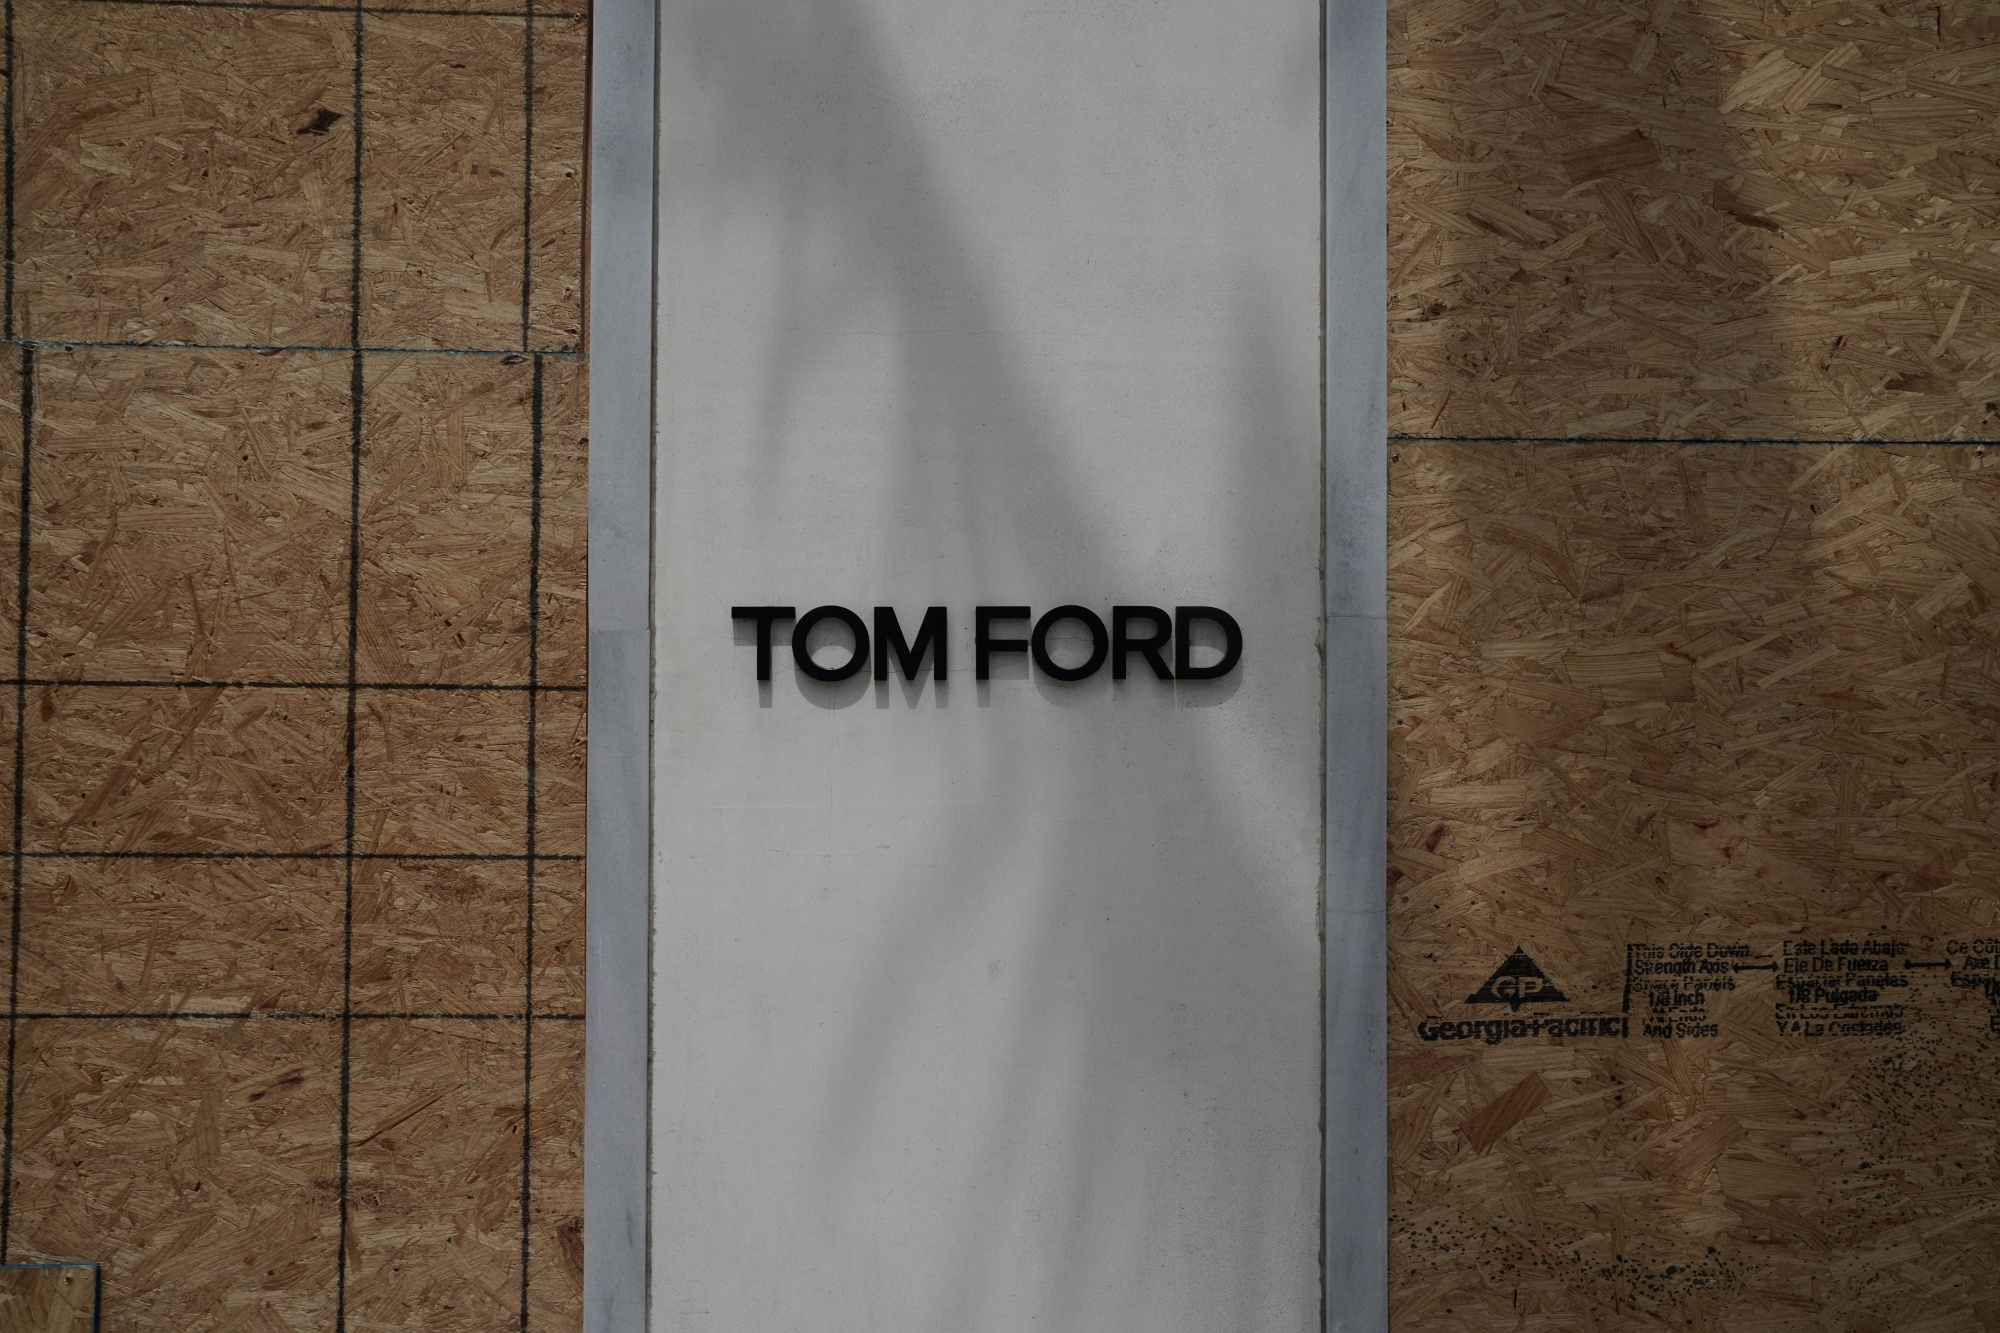 Tom Ford Sale Could Send Founder Off to Hollywood in Style - Bloomberg